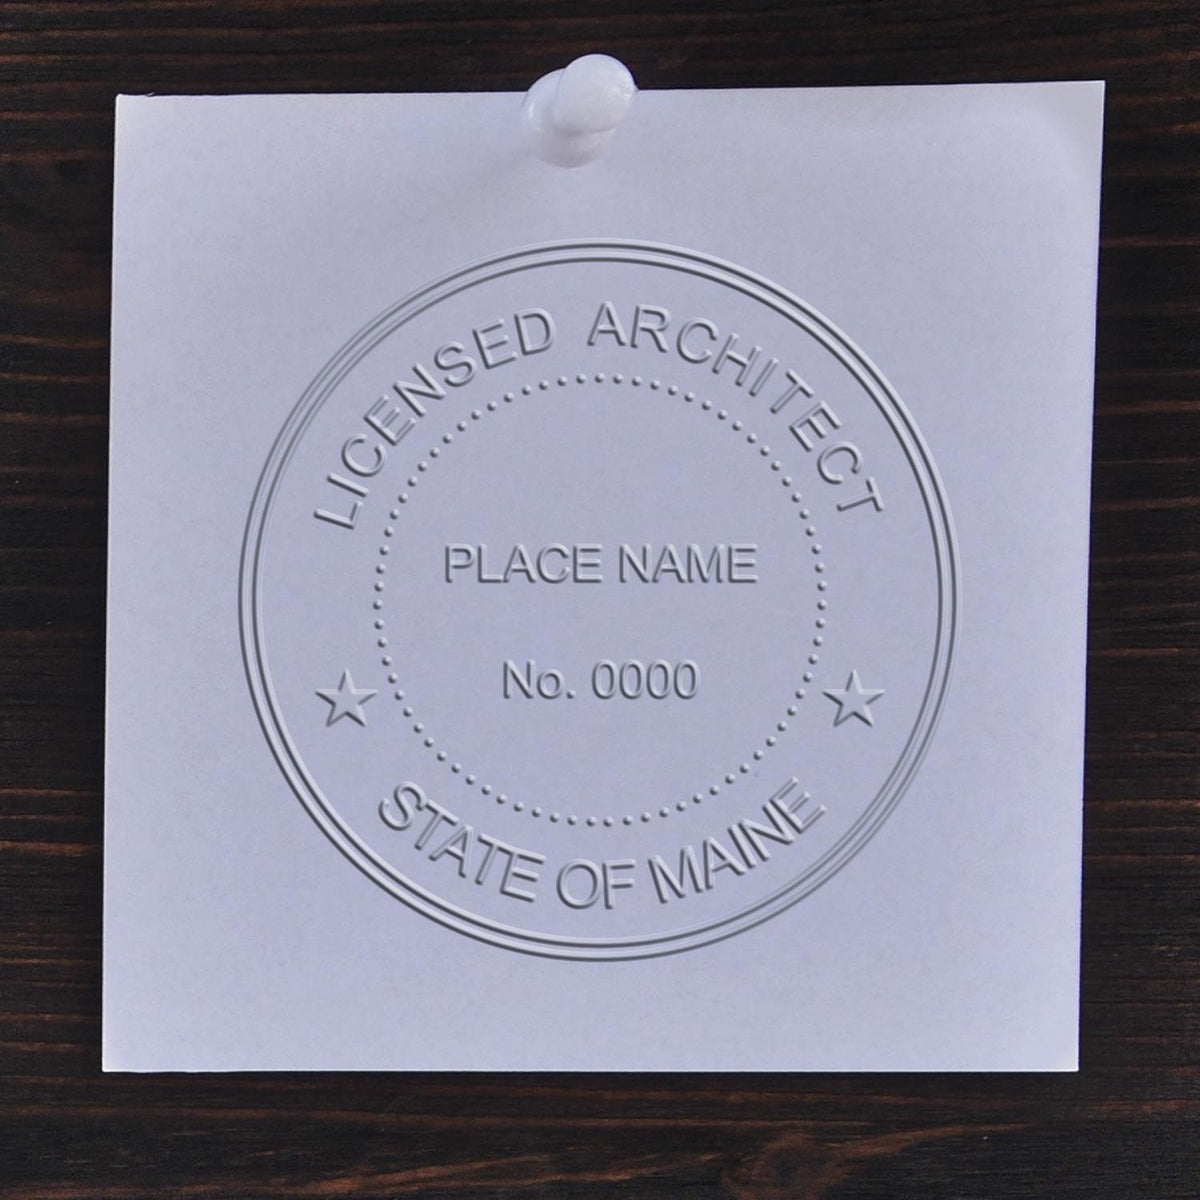 An in use photo of the Hybrid Maine Architect Seal showing a sample imprint on a cardstock